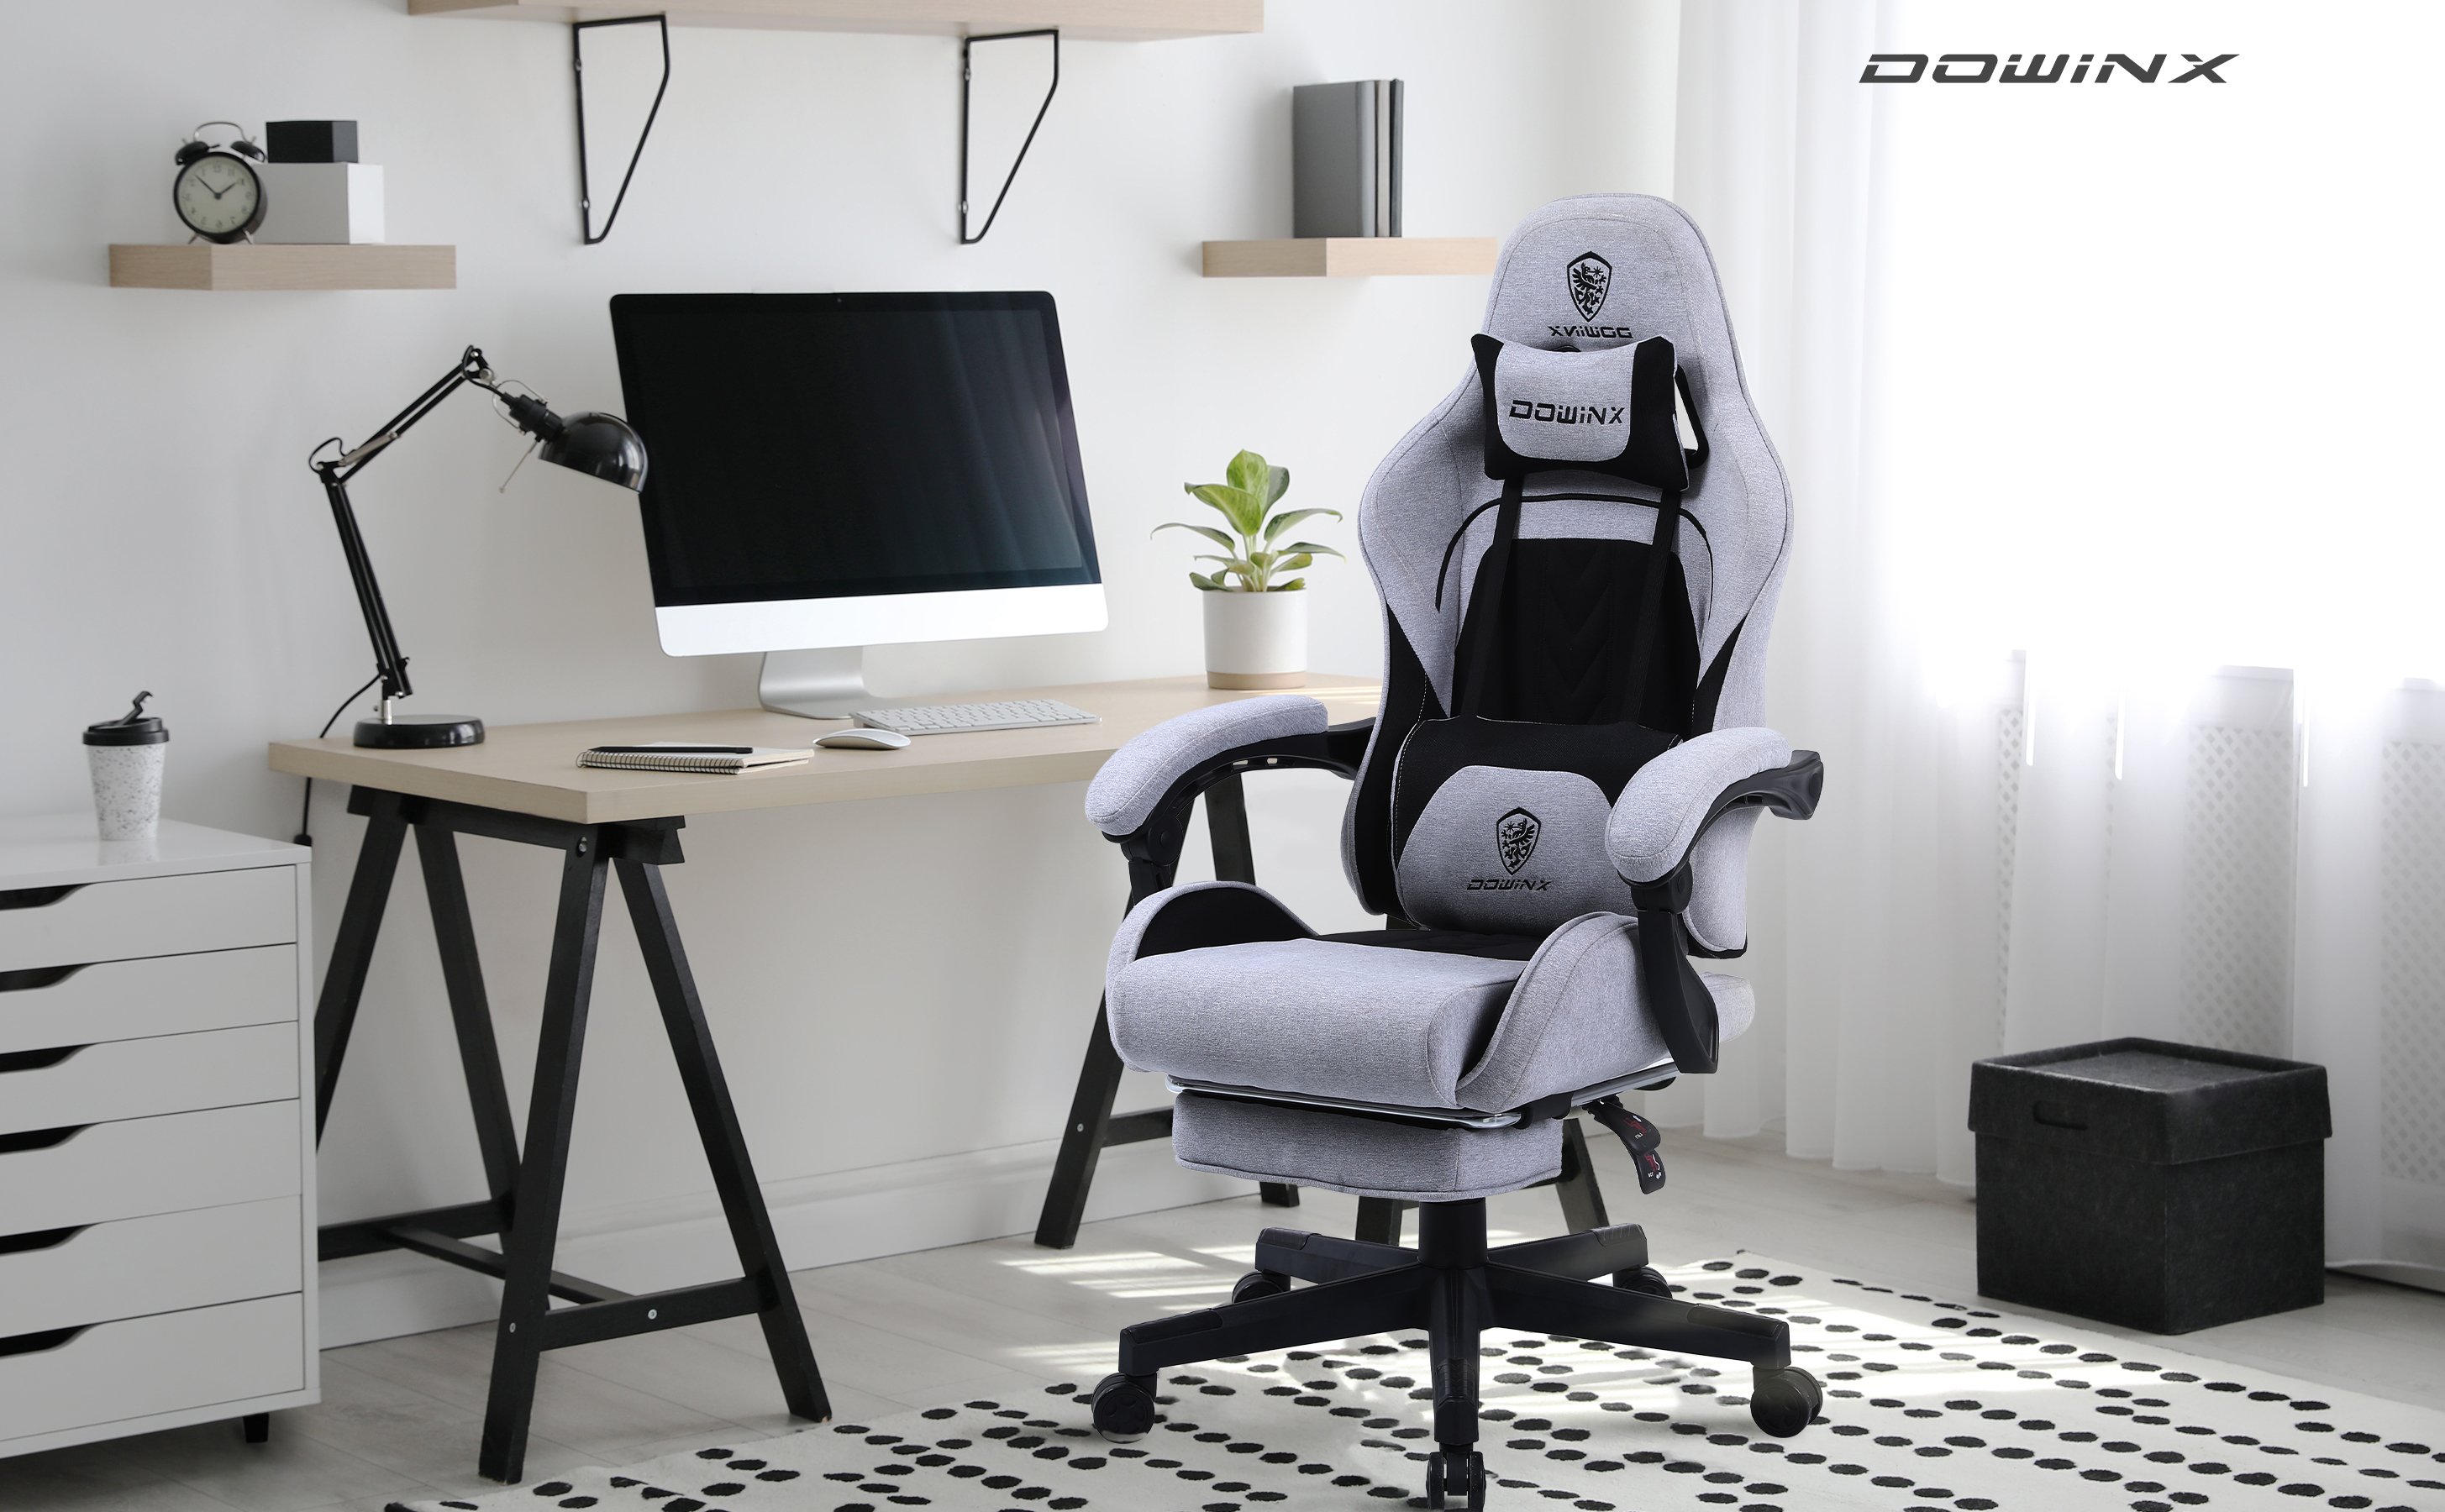 Dowinx Gaming Chair Breathable Fabric Office Chair with Pocket